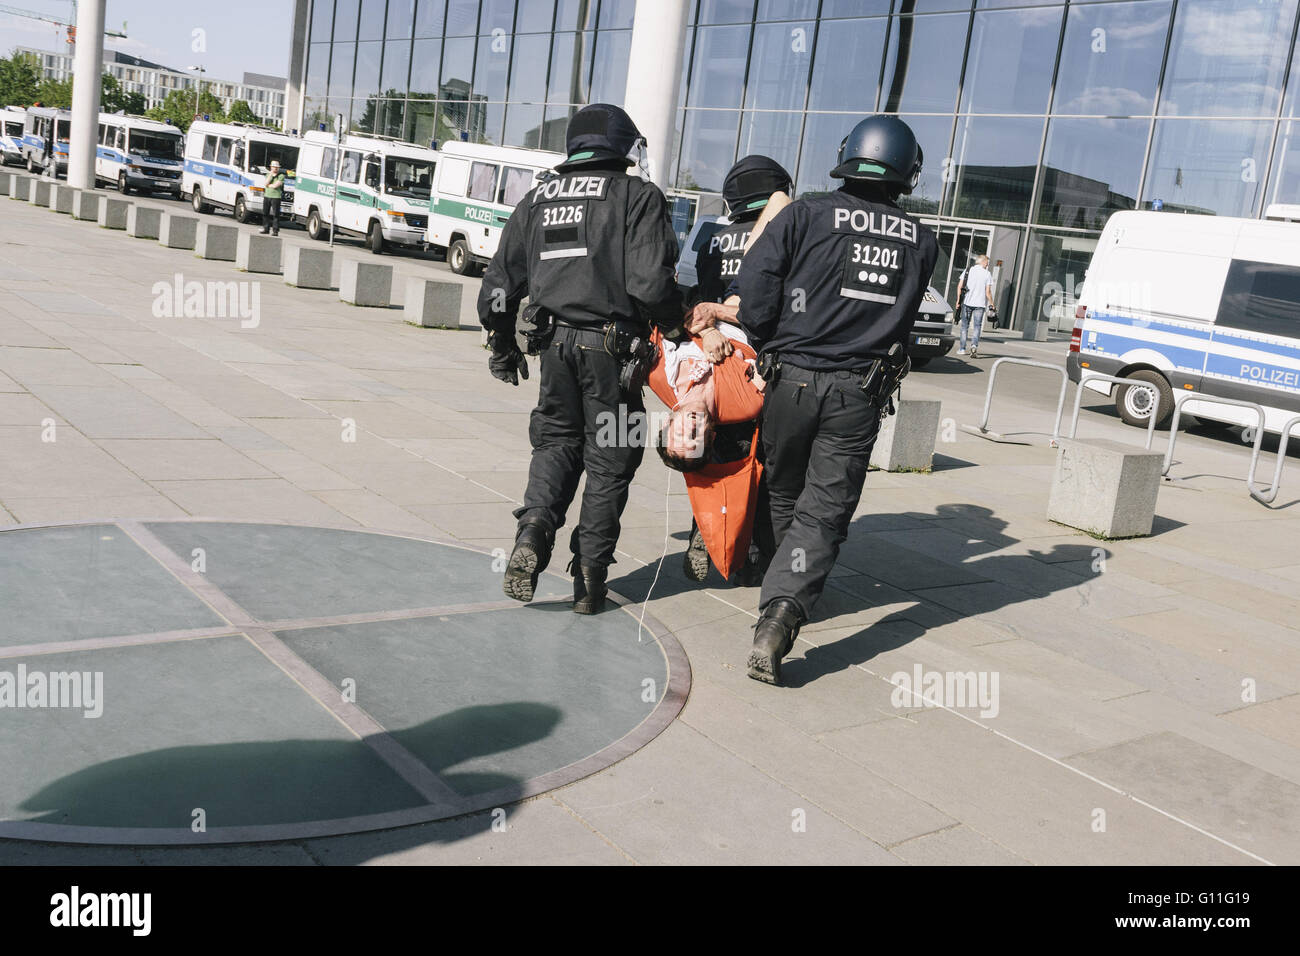 Berlin, Berlin, Germany. 7th May, 2016. An activist is arrested by the police during the counter protests against the rally held under the motto 'Merkel muss weg![Merkel must go]' organised by far-right group 'We for Berlin & We for Germany' Credit:  Jan Scheunert/ZUMA Wire/Alamy Live News Stock Photo